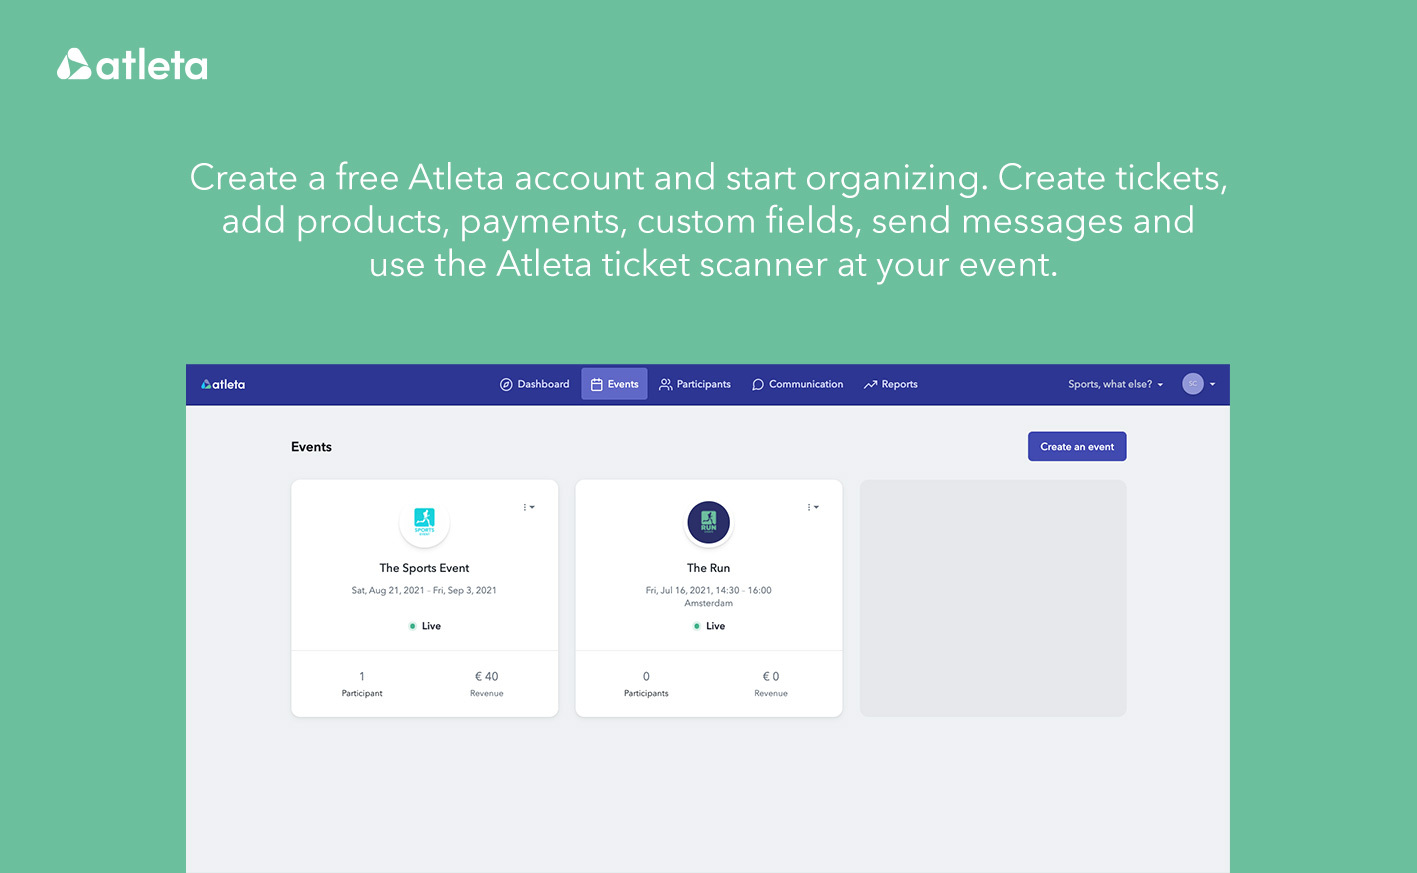 Create a free Atleta account and start organizing. Create tickets, add products, payments, custom fields, send messages and use the Atleta ticket scanner at your event.